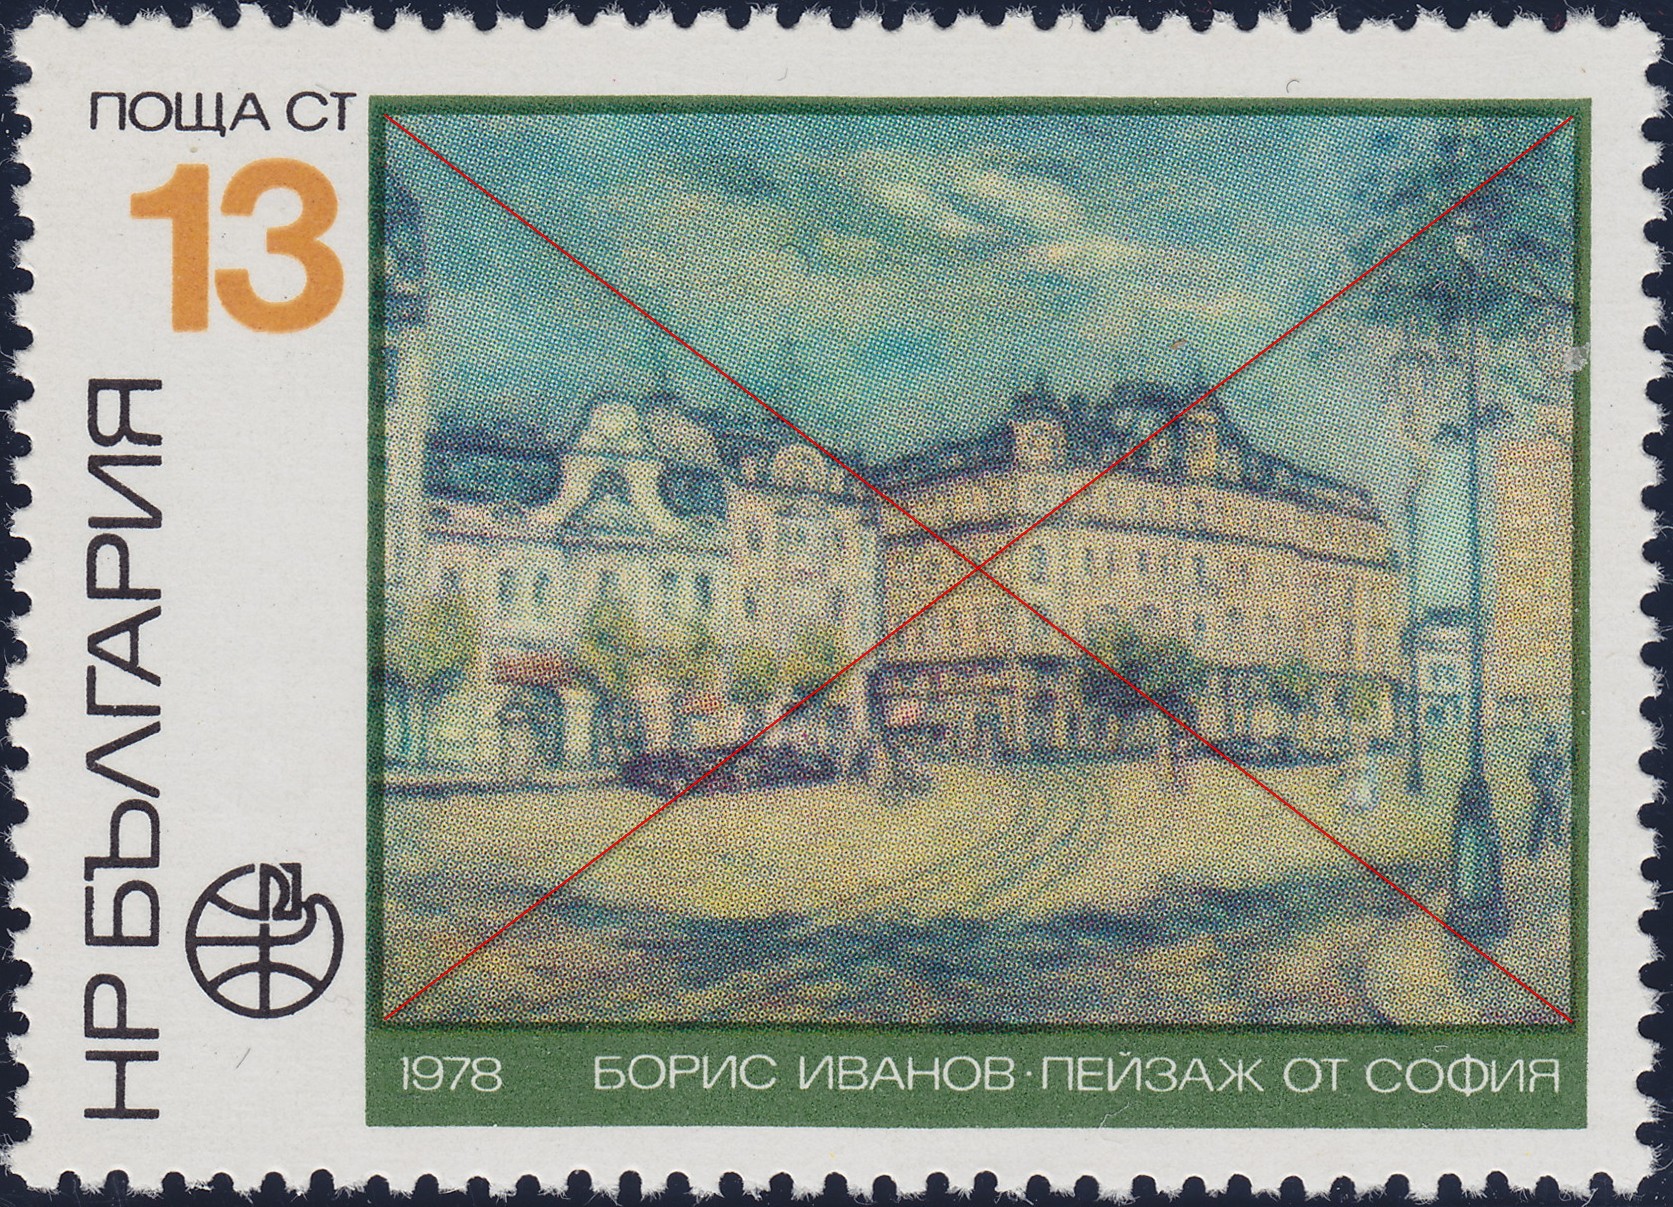 MINIMUM-SIZE-OF-A-BICYCLE-ON-A-BICYCLE-STAMP-Bulgaria-stamp